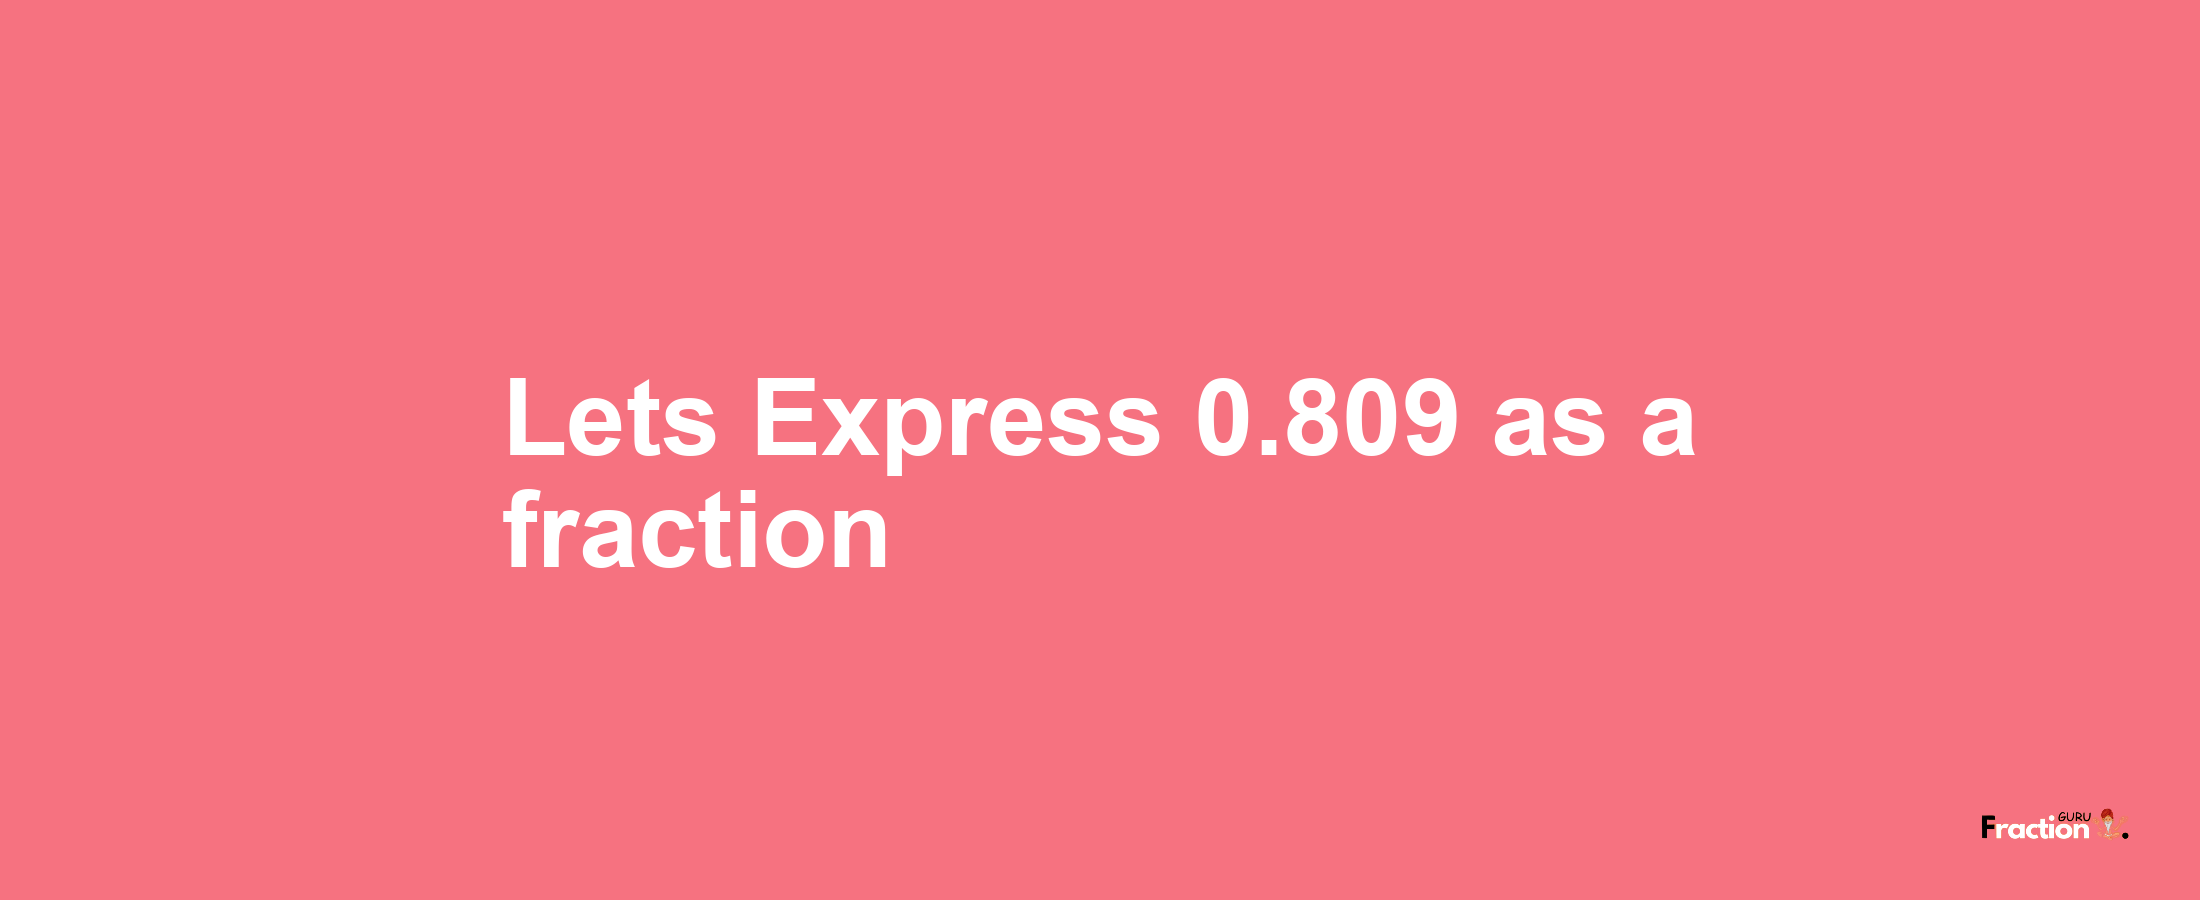 Lets Express 0.809 as afraction